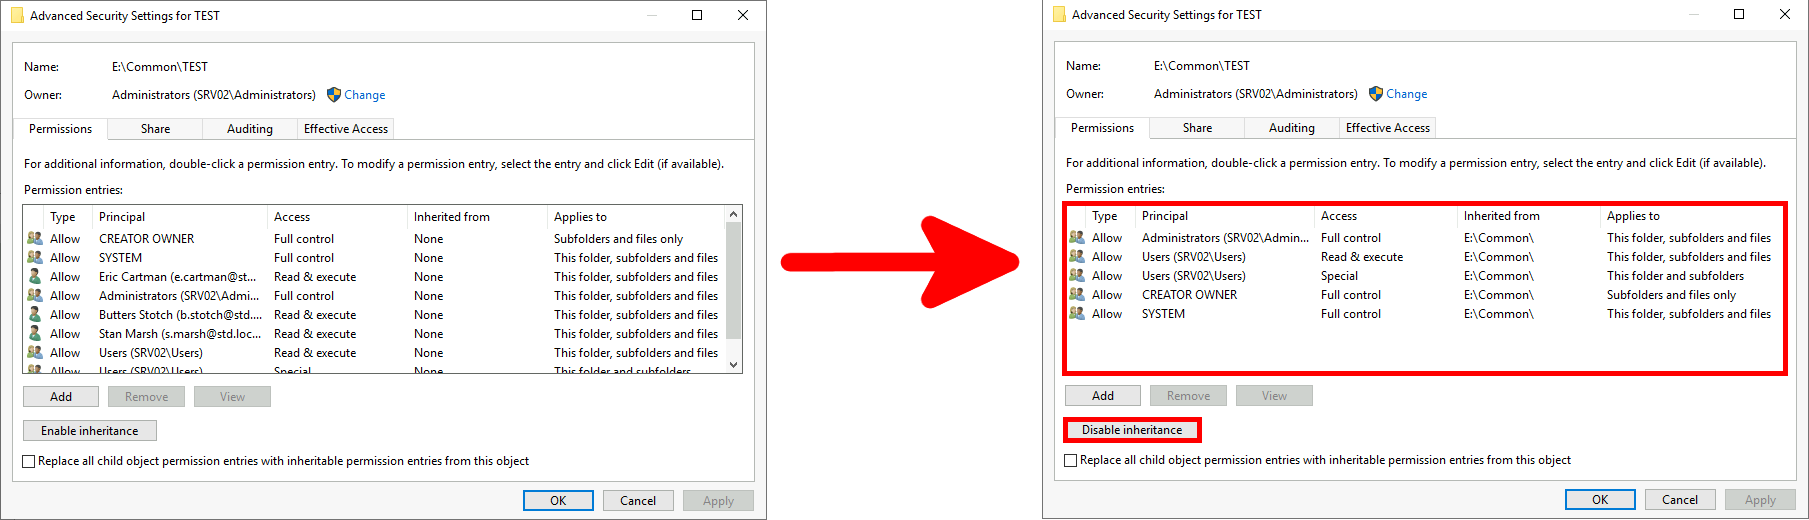 before and after comparison of two advanced security settings windows